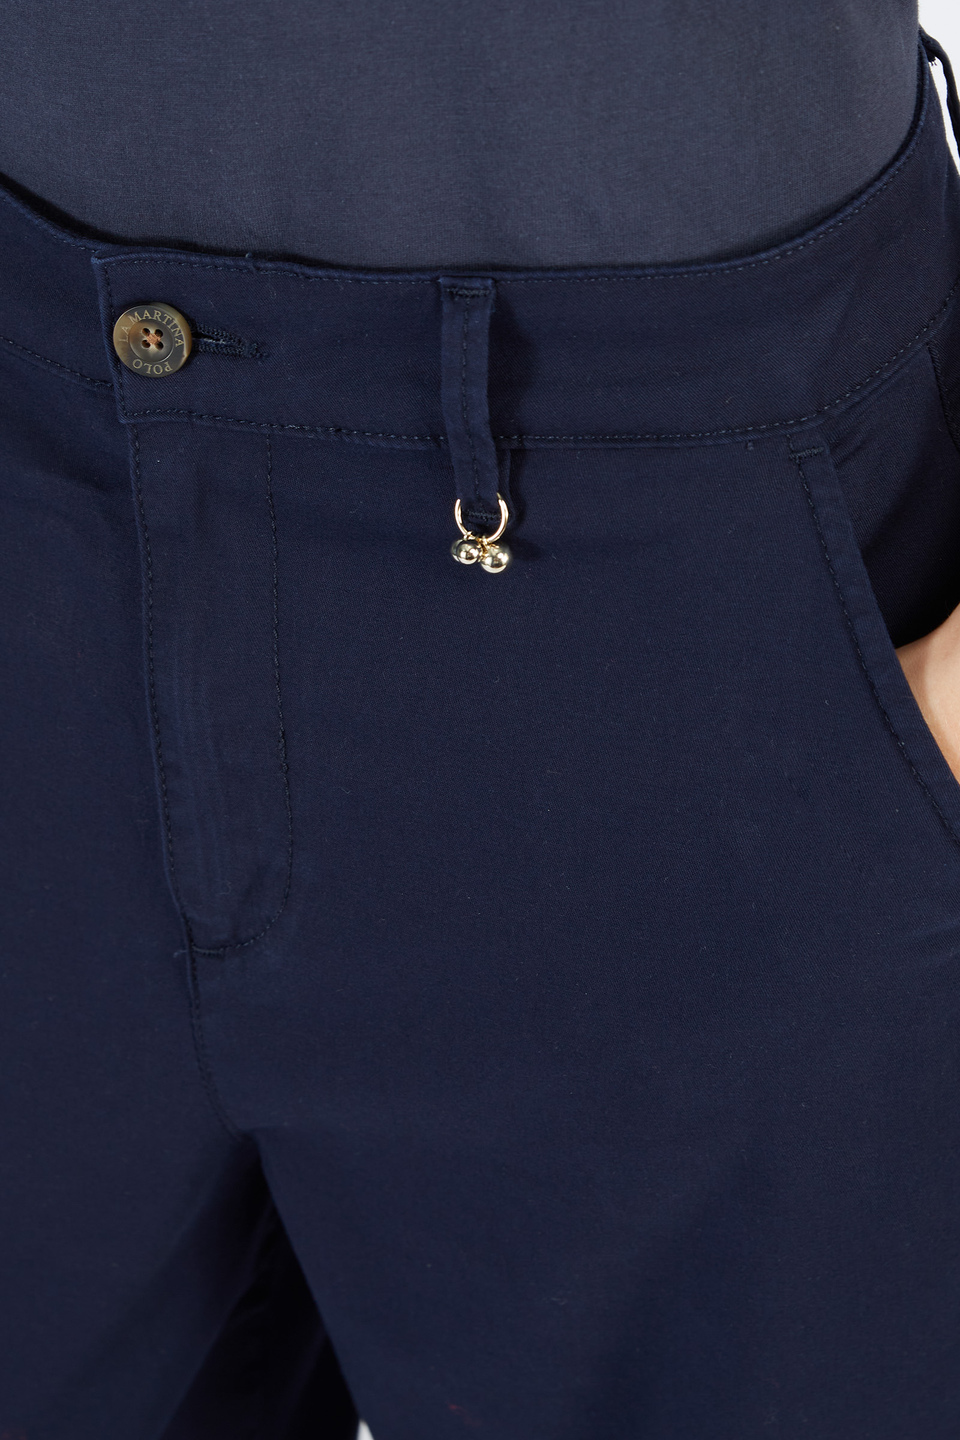 Women’s high-waisted trousers with narrow bottom | La Martina - Official Online Shop